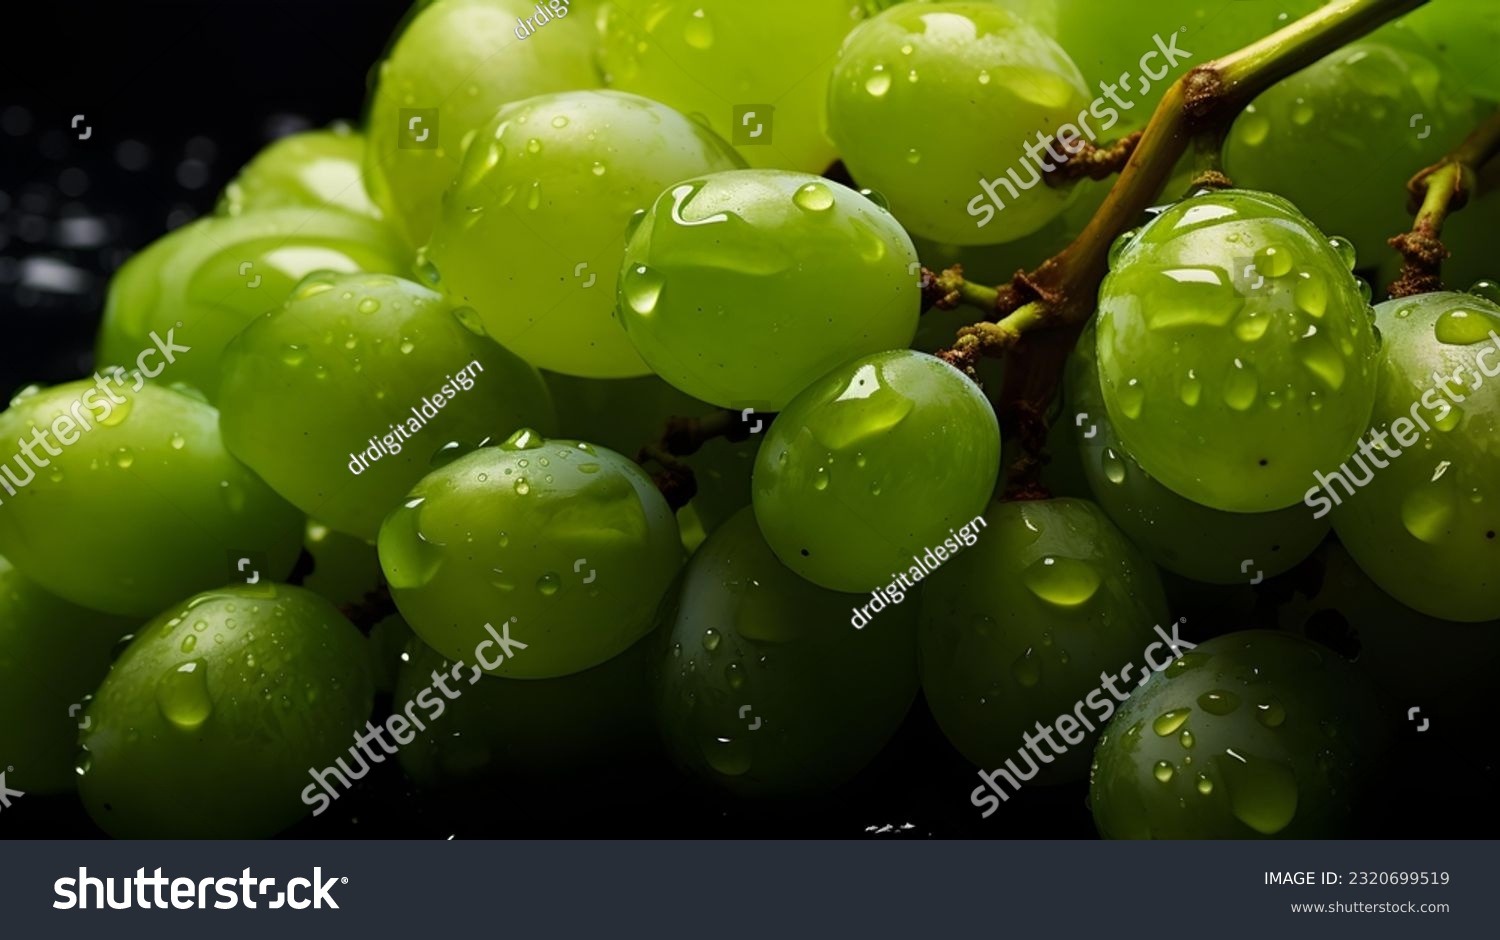 Overhead Shot of green Grapes with visible Water Drops. Close up.
 #2320699519